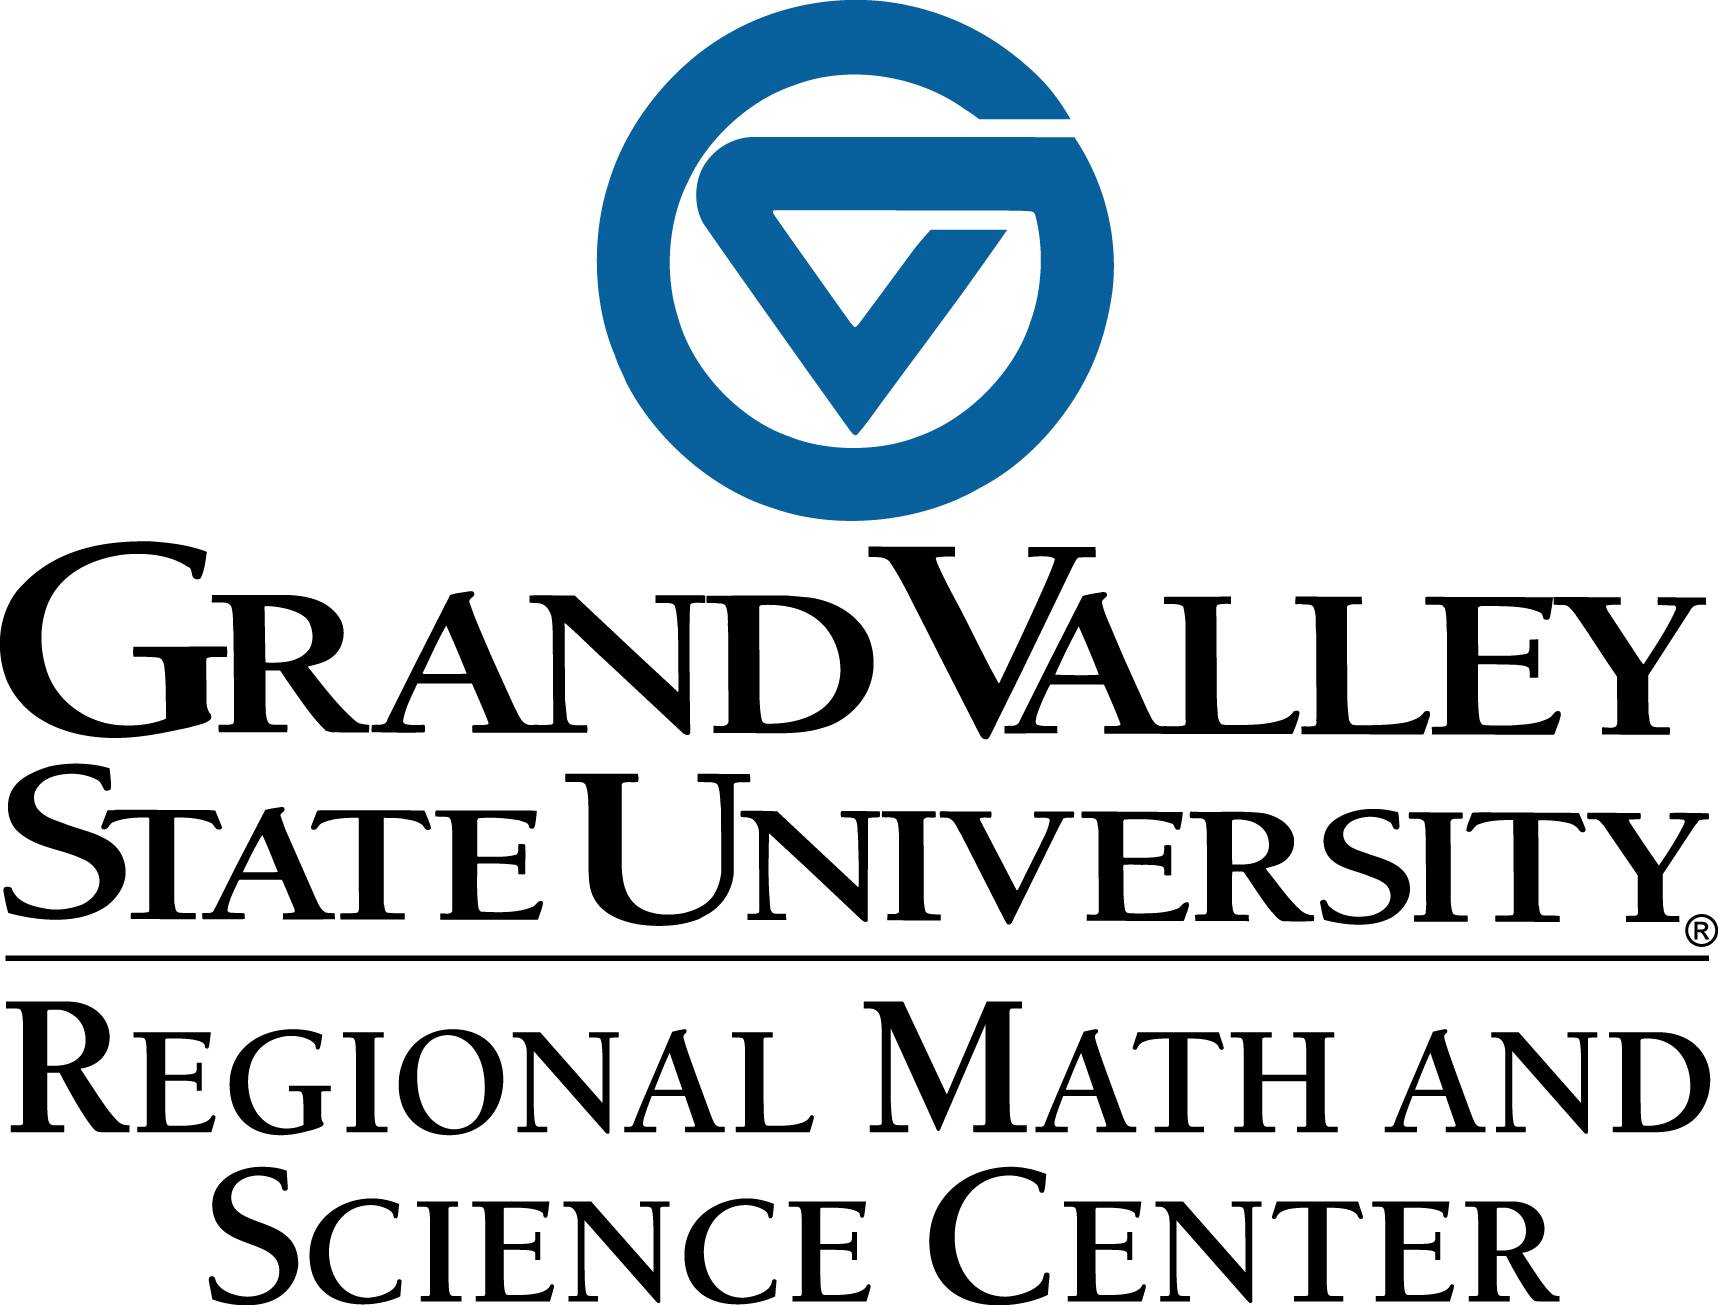 Regional Math and Science Center logo